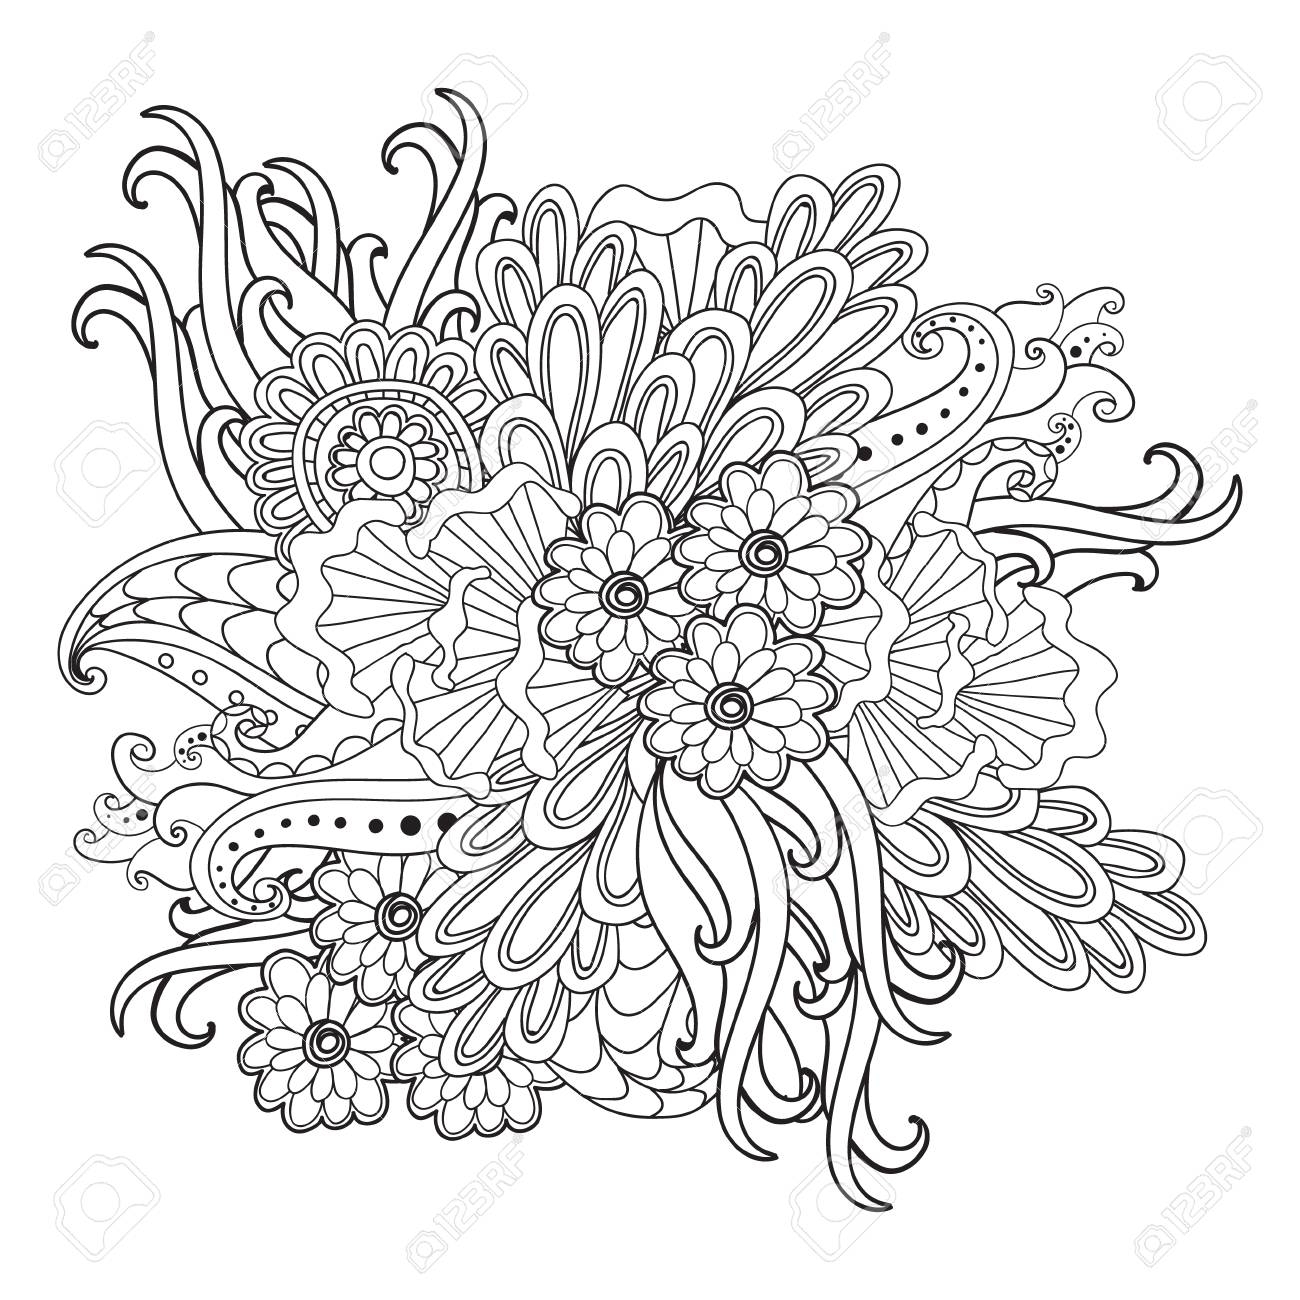 Flower Frame Coloring Pages at GetColorings.com | Free printable